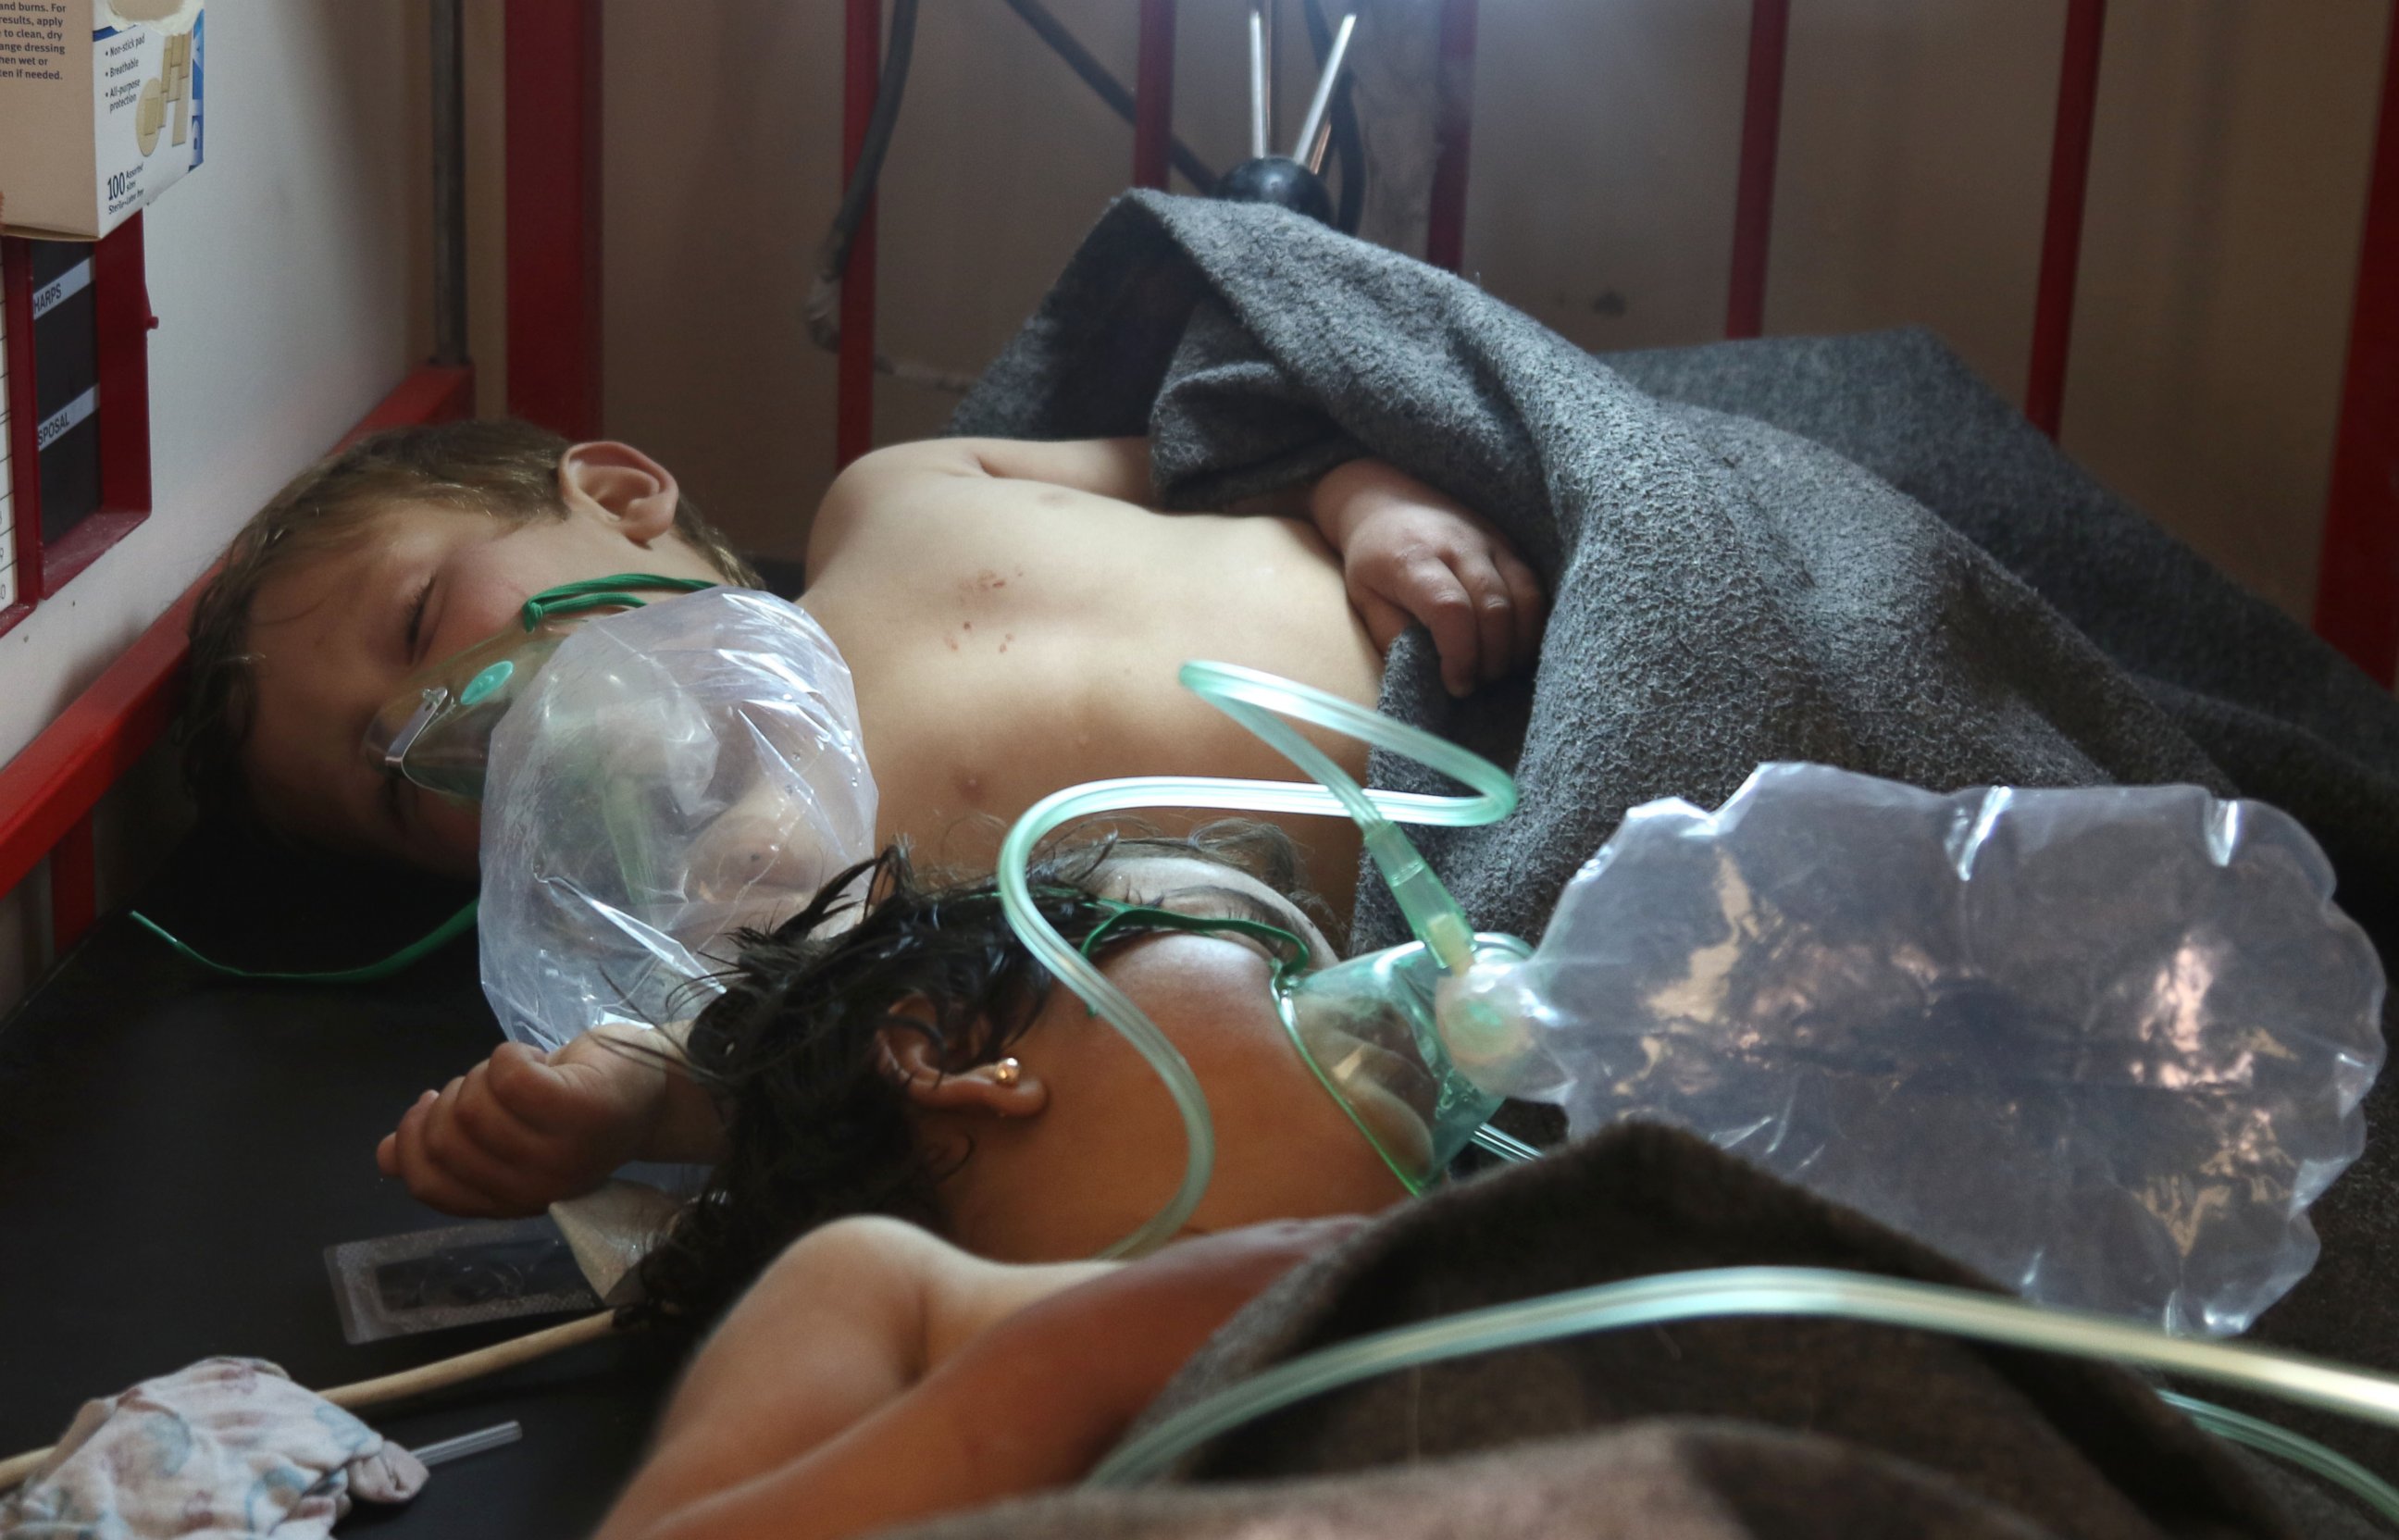 PHOTO: Syrian children receive treatment at a small hospital in the town of Maaret al-Noman following a suspected toxic gas attack in Khan Sheikhun, a nearby rebel-held town in Syrias northwestern Idlib province, on April 4, 2017.
